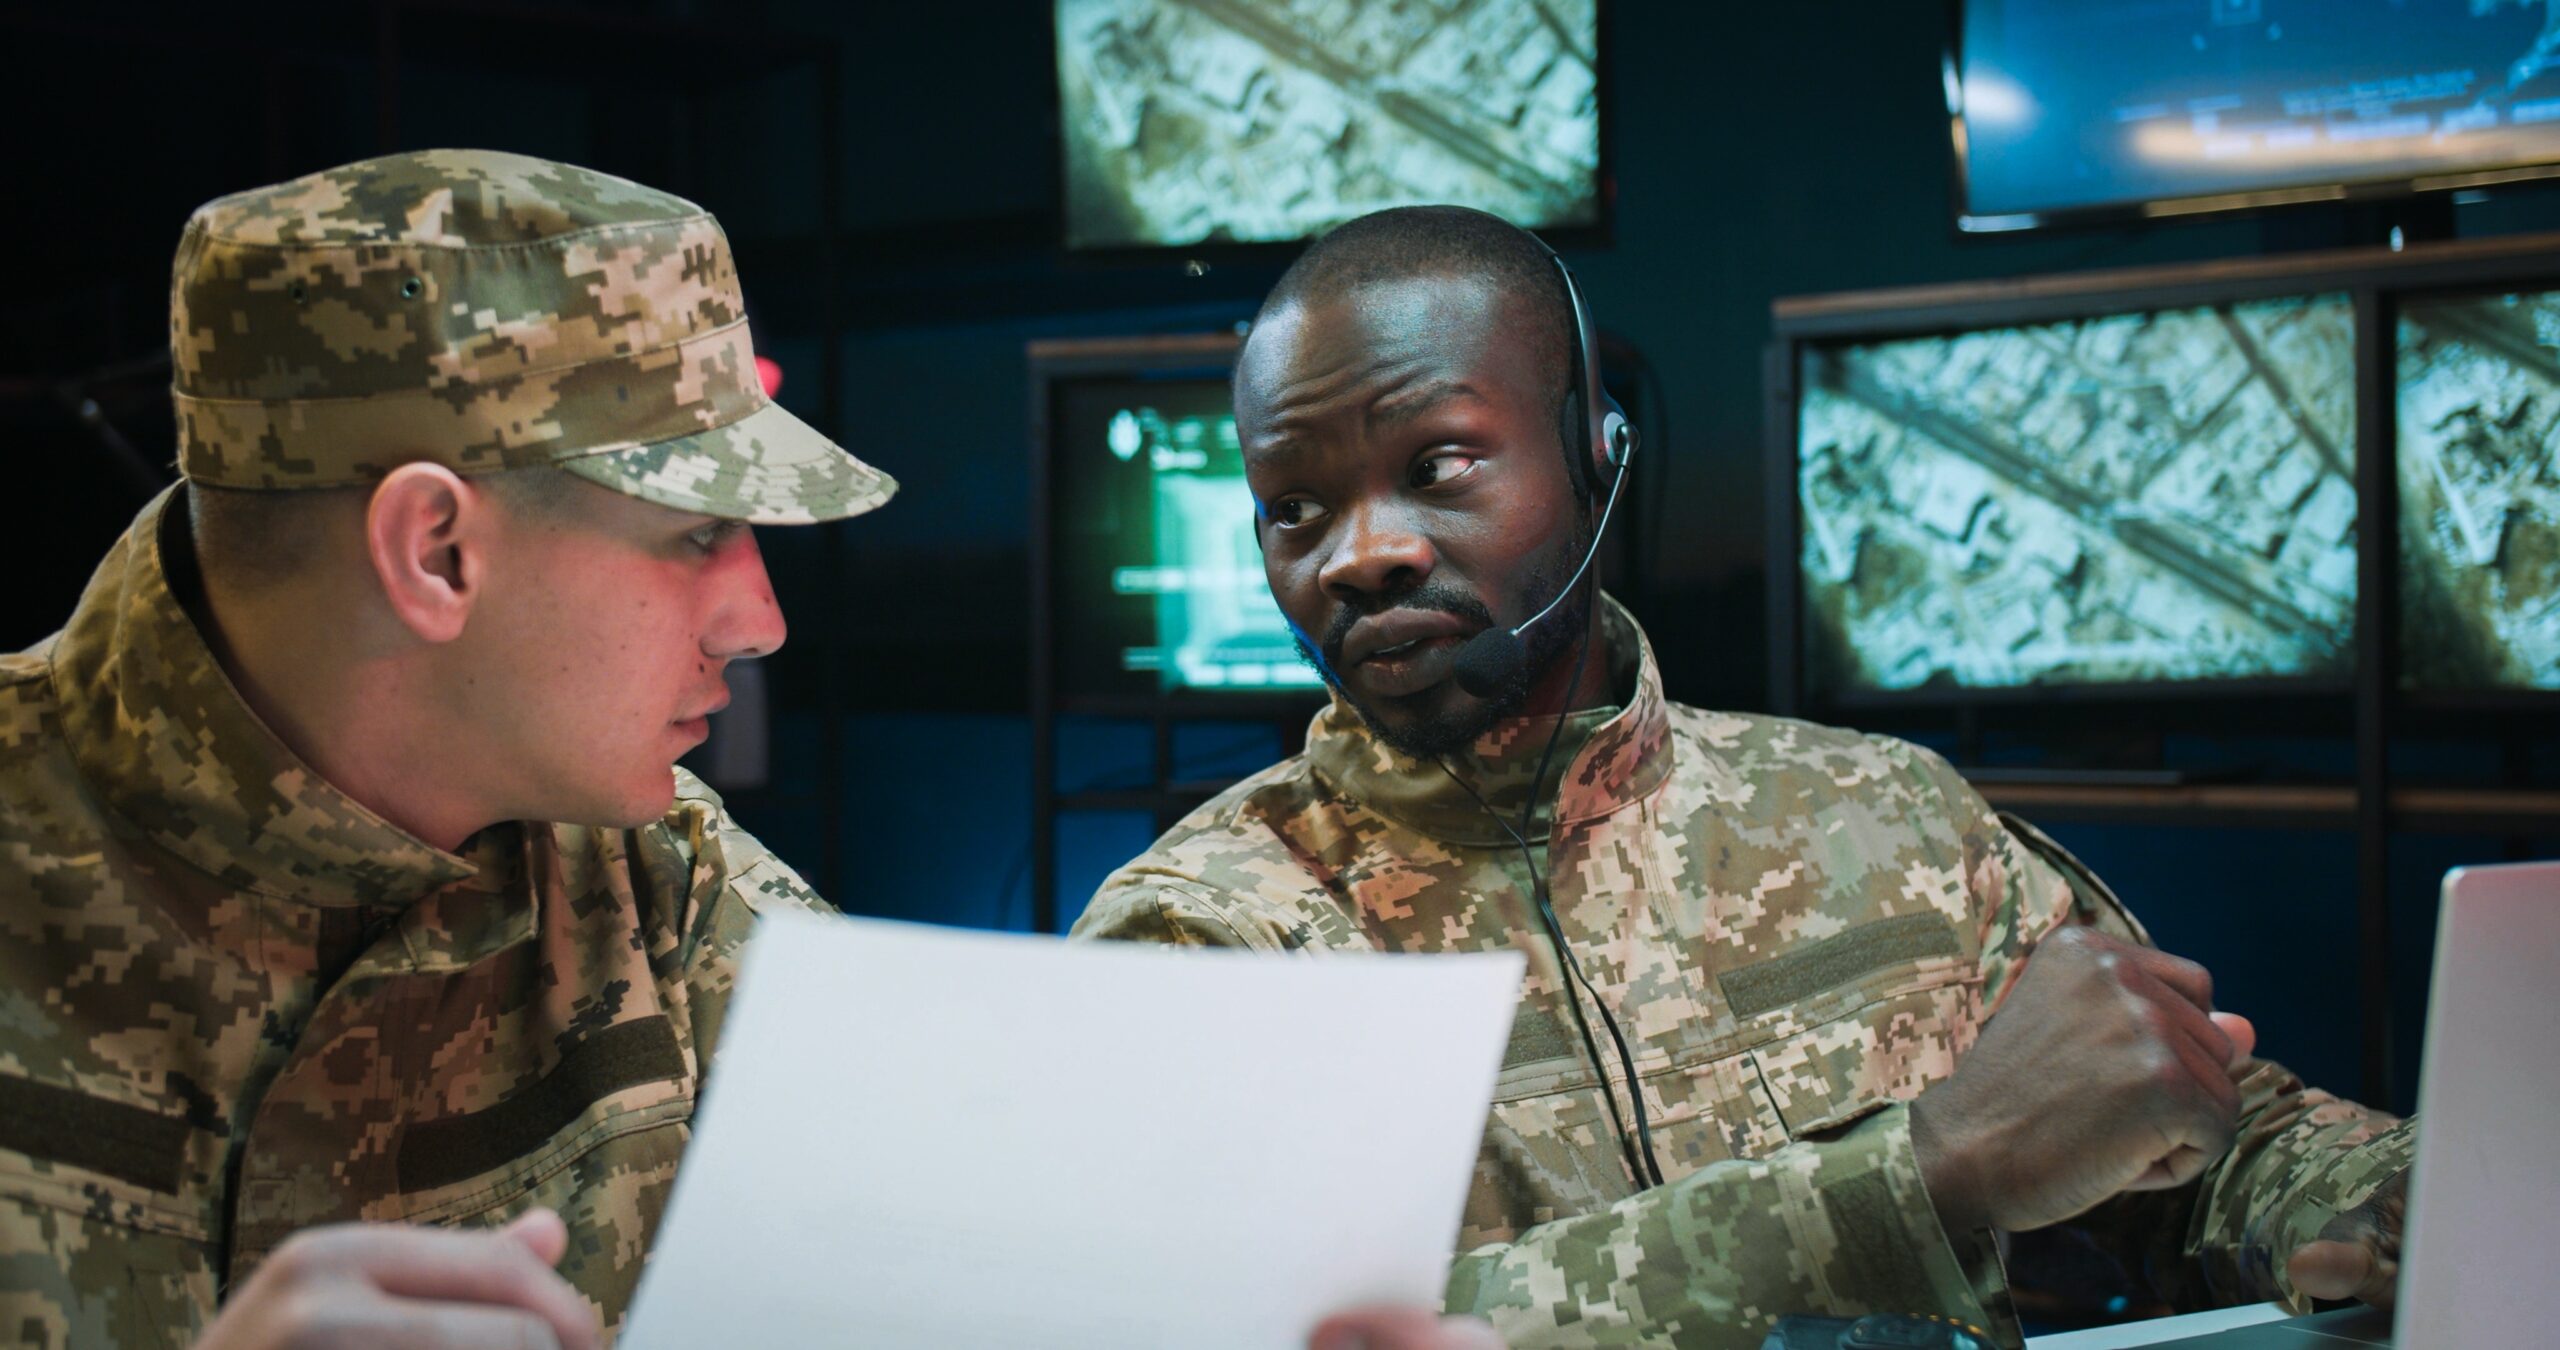 <p>Don’t call your civilian coworkers this military phrase! It is only acceptable to refer to a coworker or employee as a “good piece of gear” within the context of military service.</p>